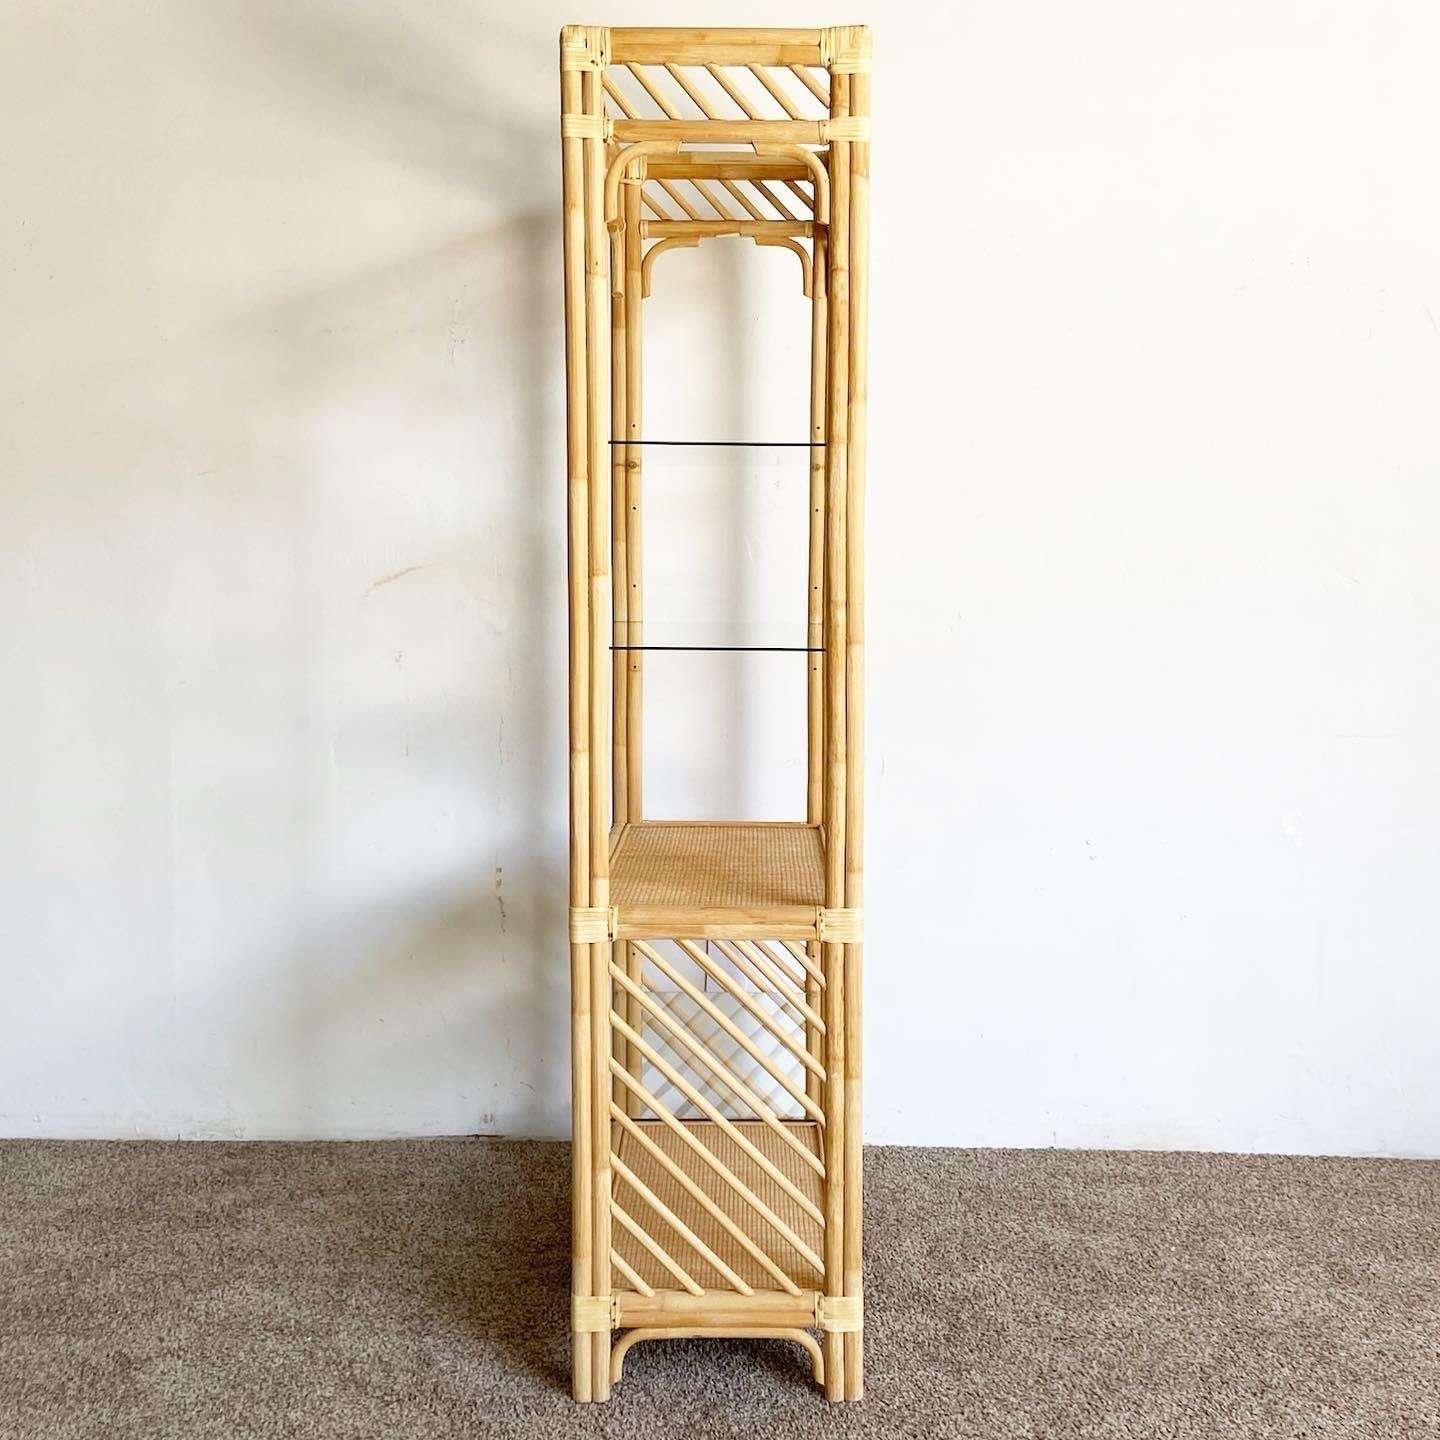 Boho Chic Bamboo Rattan Etagere - 4 Shelves In Good Condition For Sale In Delray Beach, FL